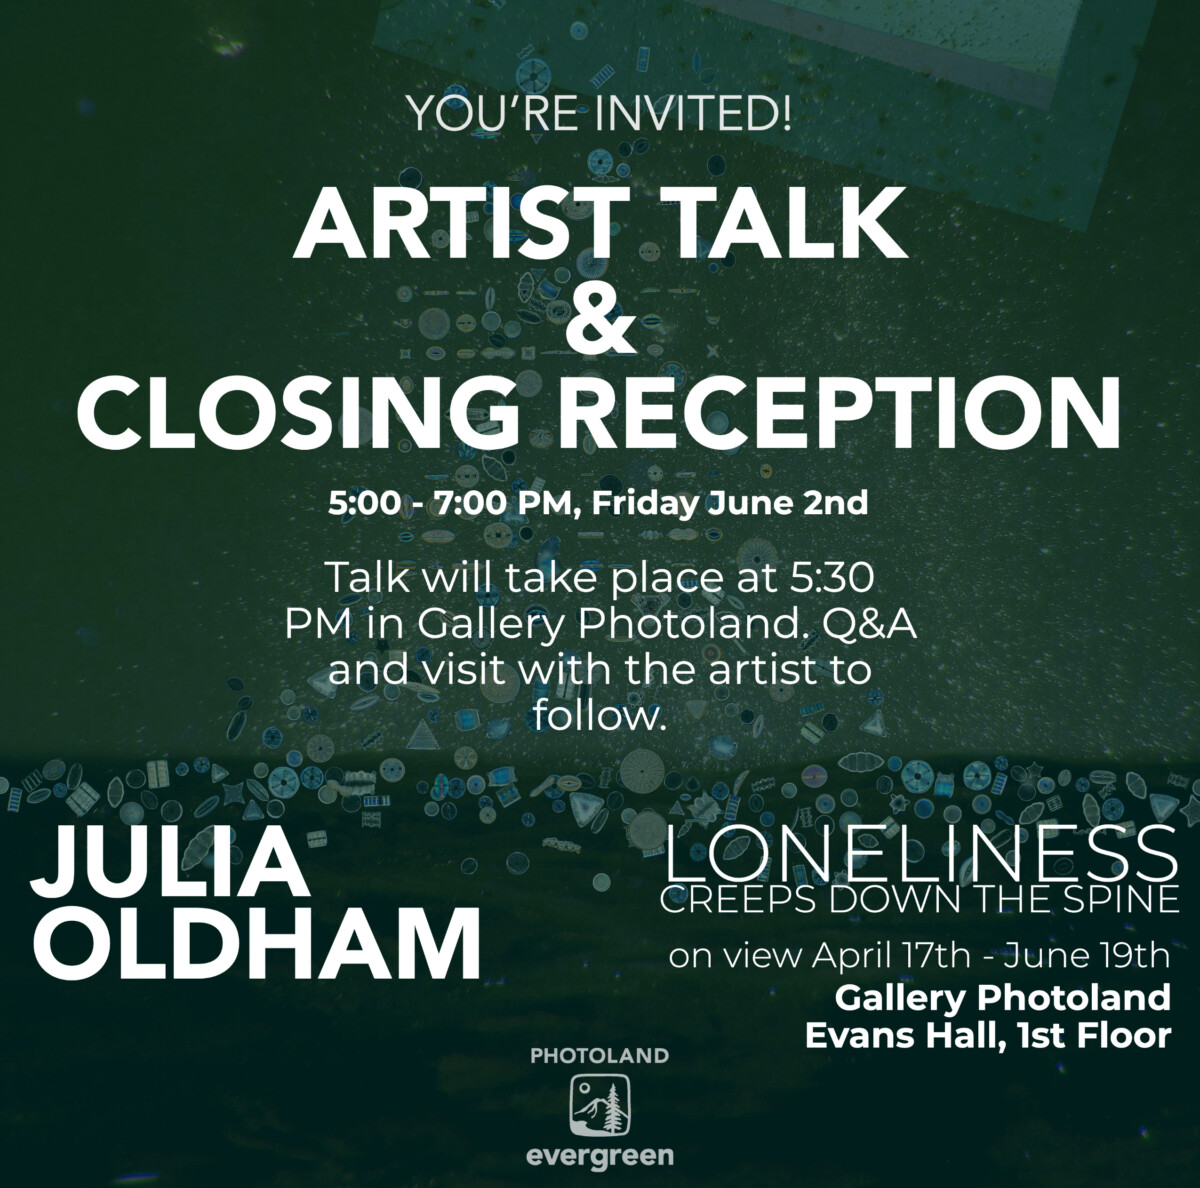 Invitation to and artist talk and closing reception for the show Loneliness Creeps Down the Spine by artist Julia Oldham from 5-7pm on Friday June 2nd 2023 in Gallery Photoland.